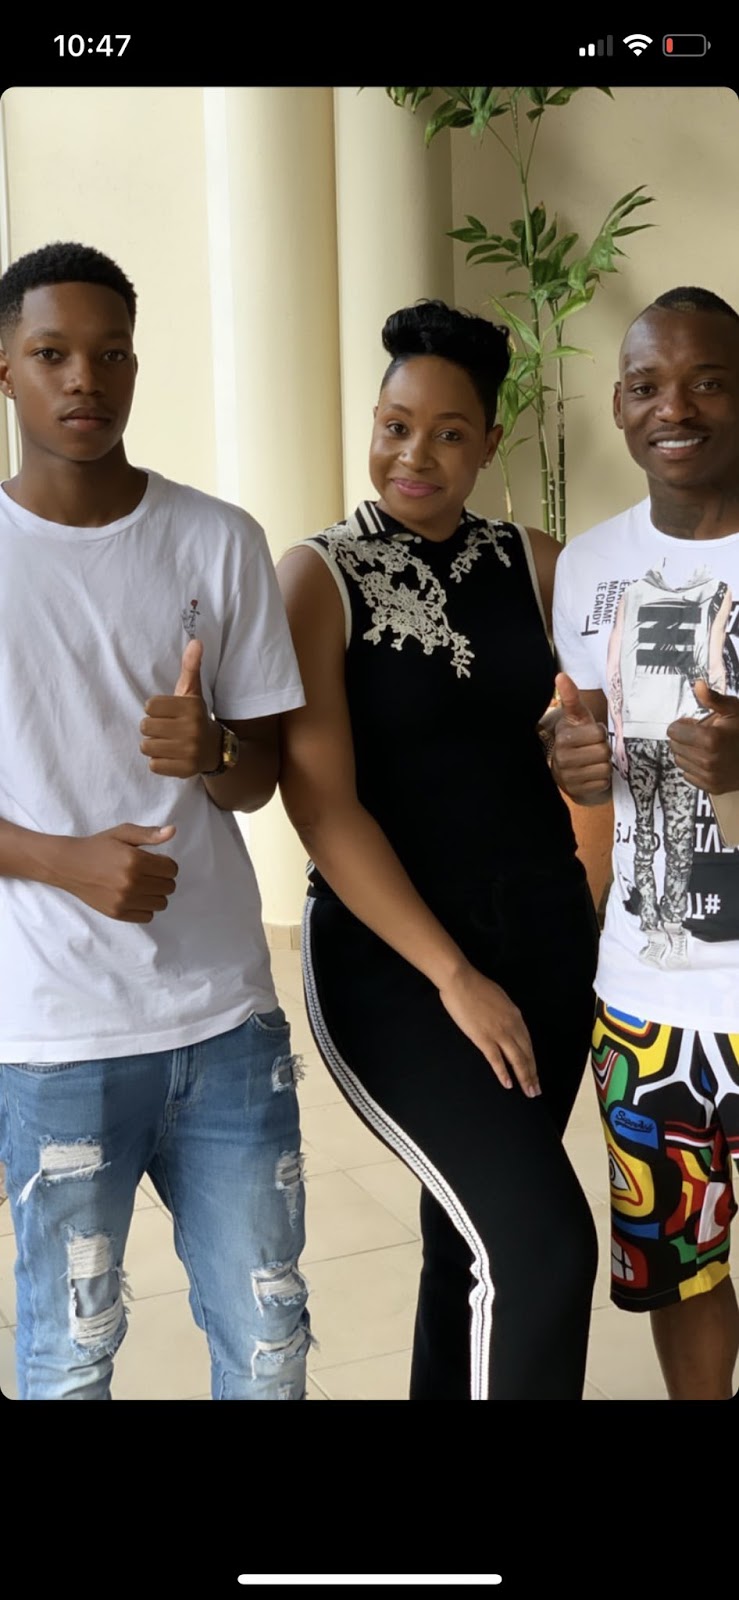 Pokello Claps back following heavy criticism for visiting the Warriors